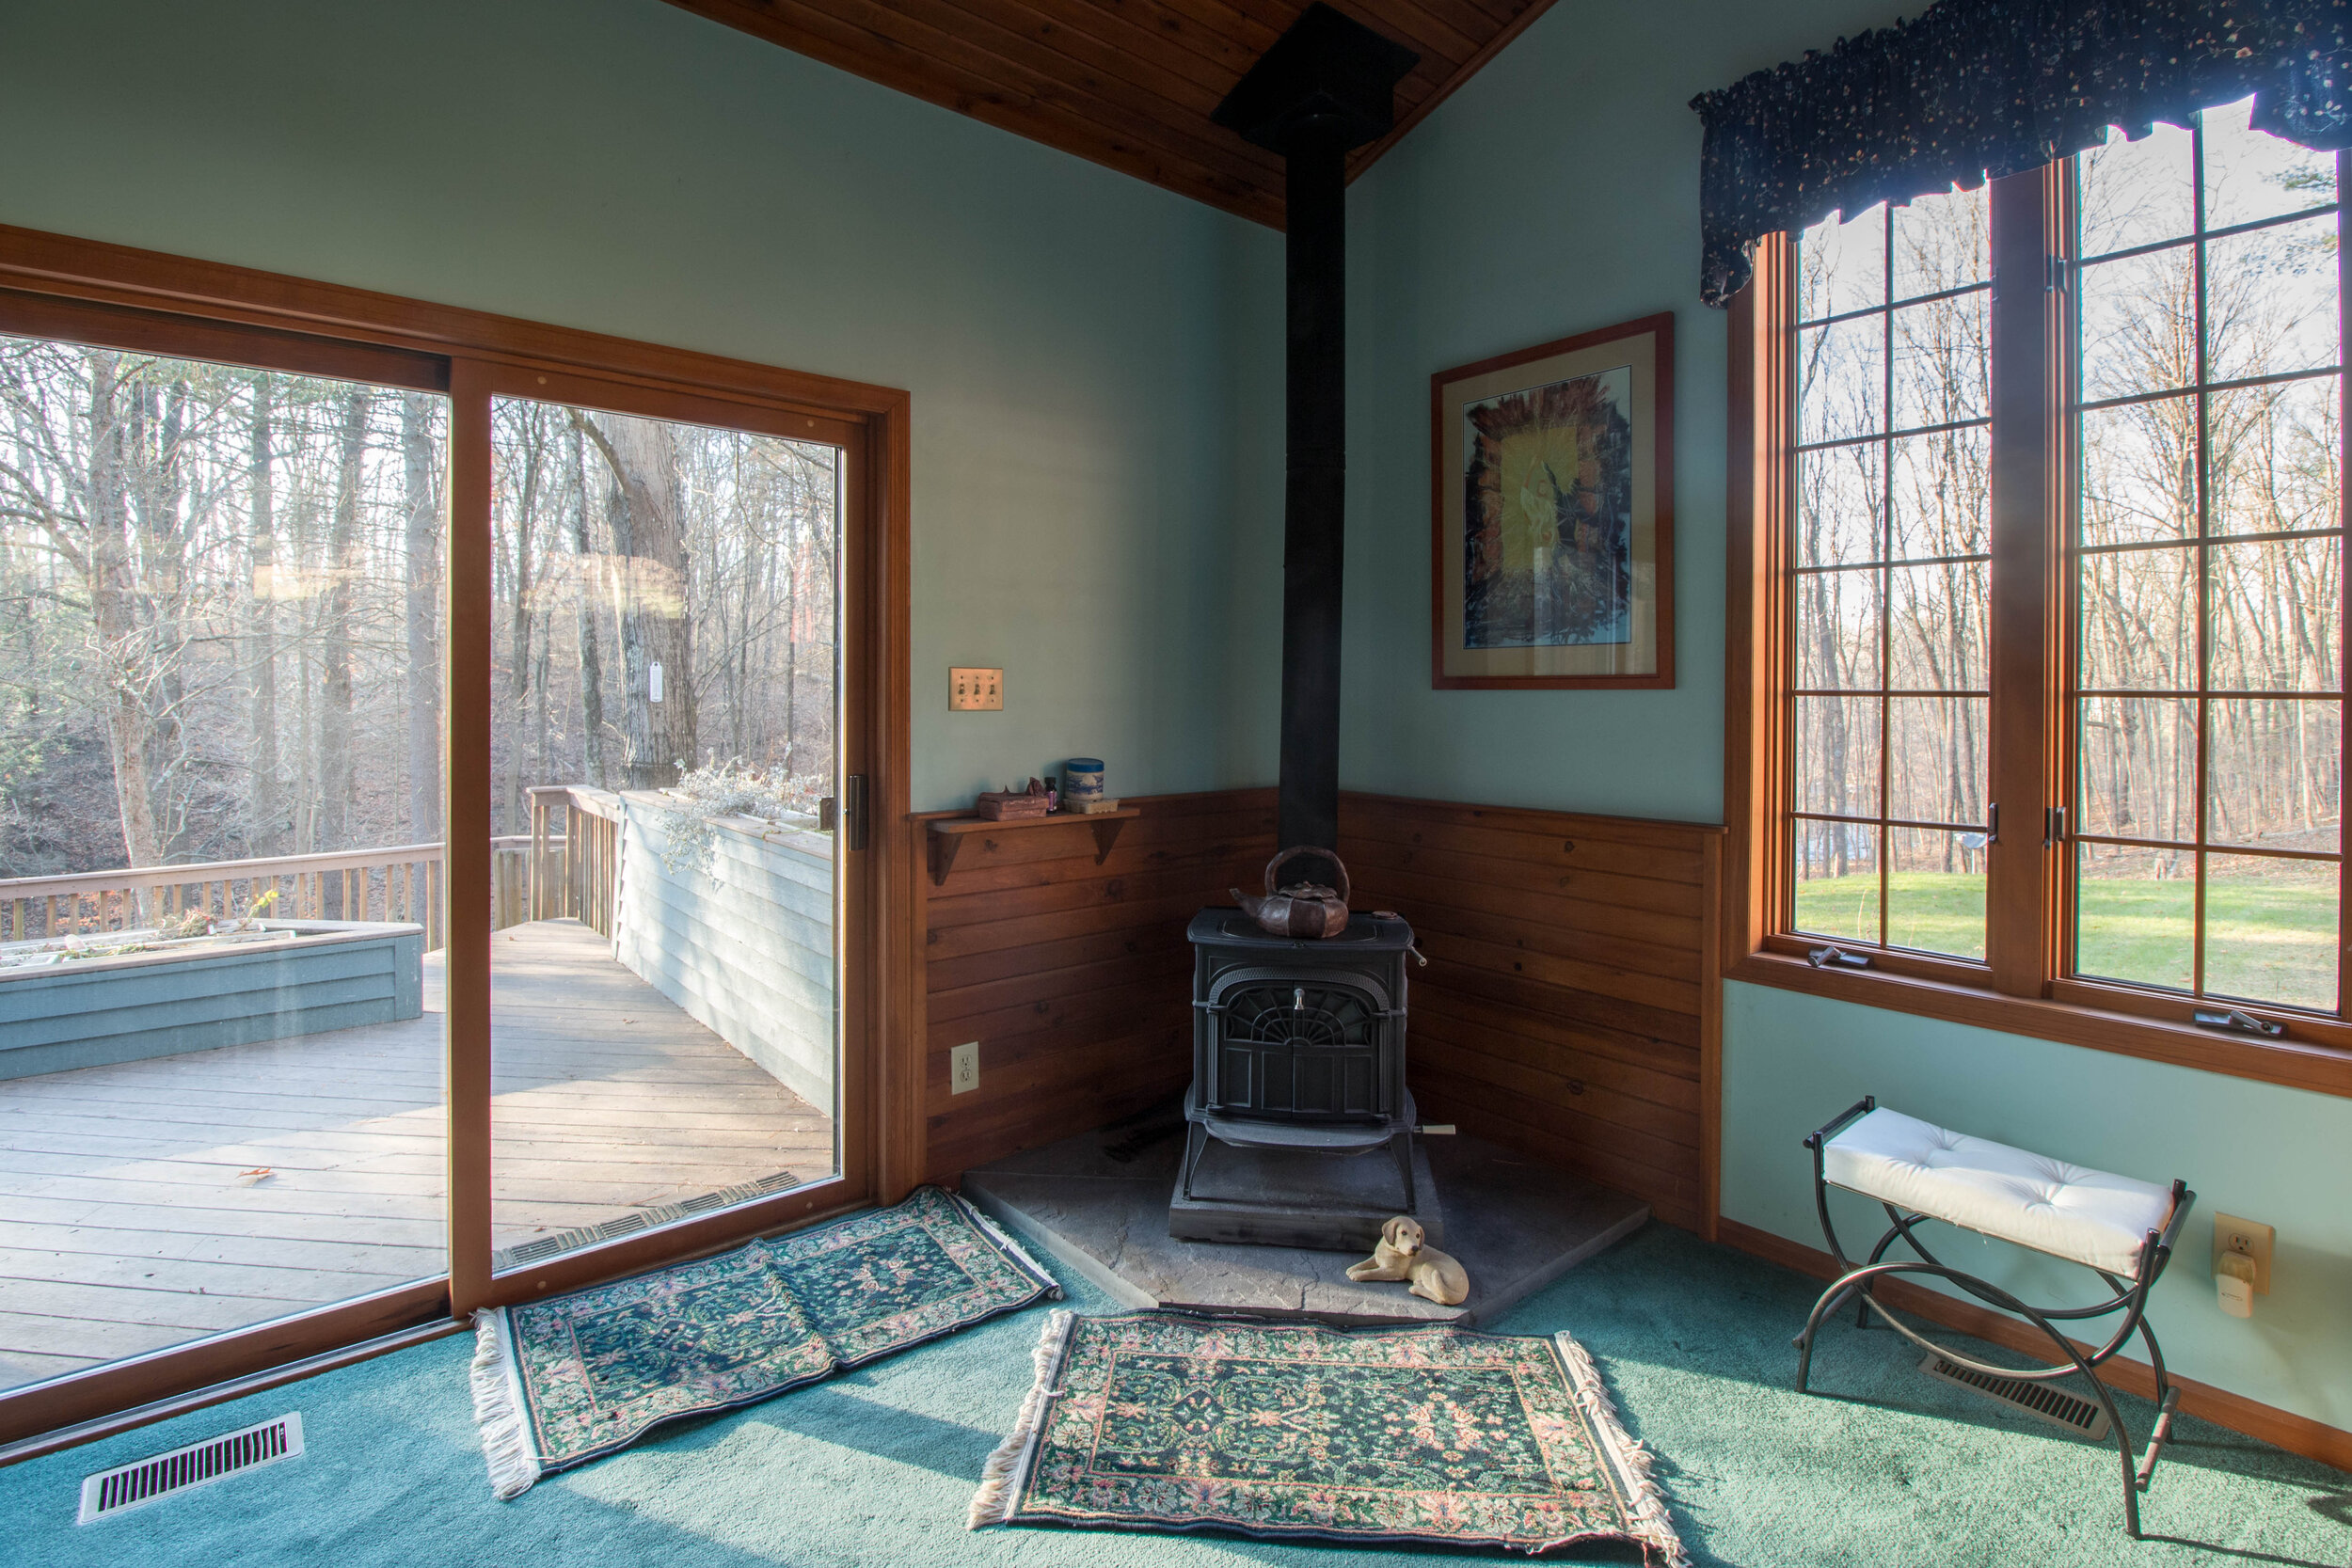  Bedroom with the blueish green carpet, sliding door and a wood burning stove in the corner by the sliding glass door. 